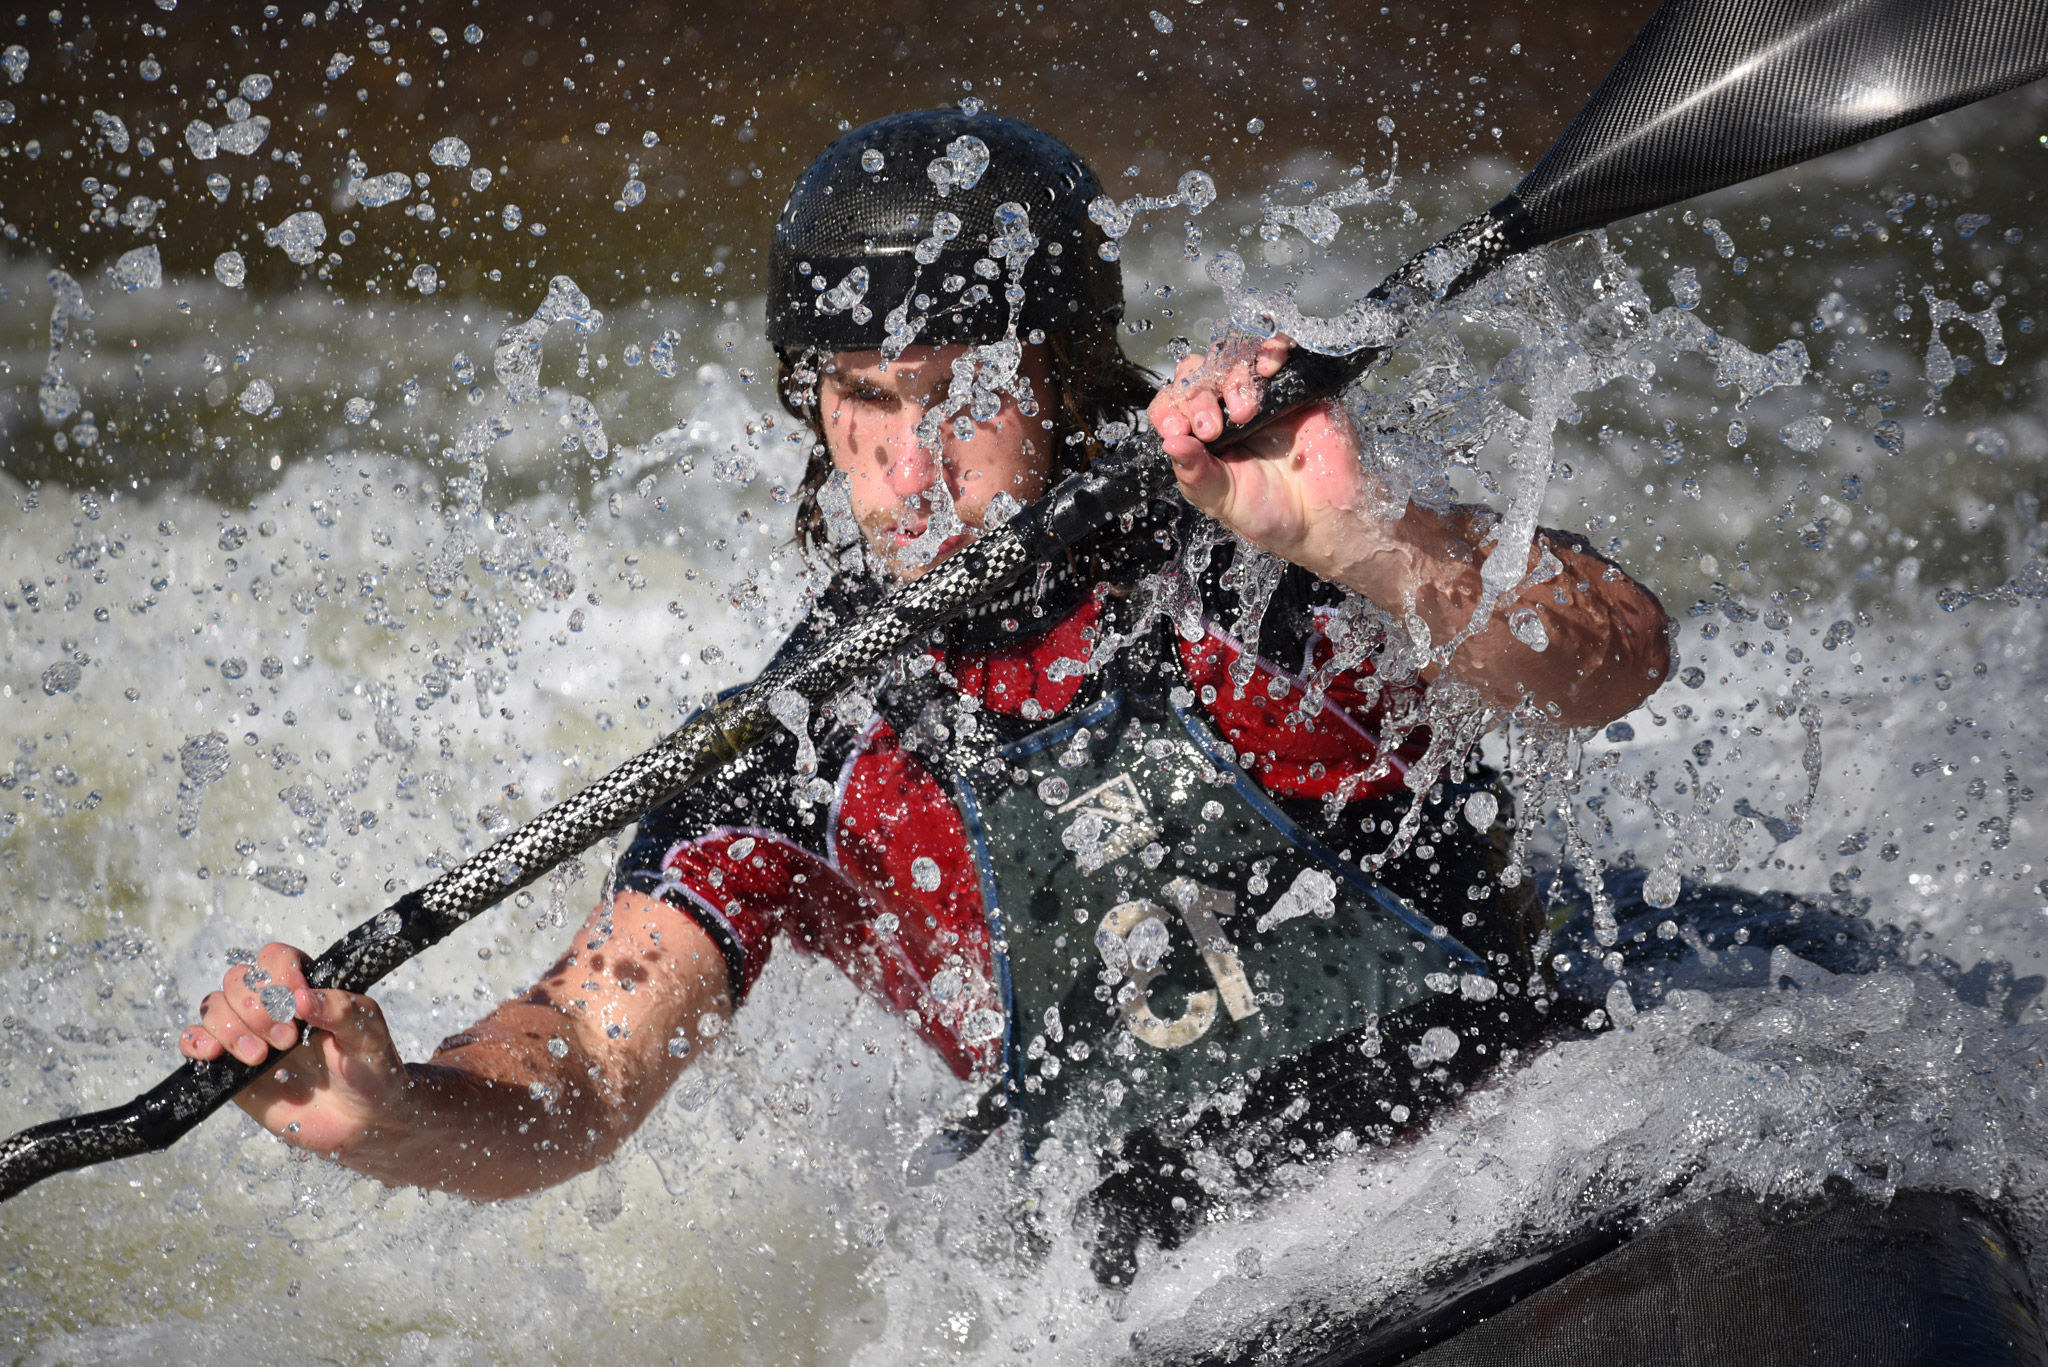 AF-P NIKKOR 70-300mm f/4.5-5.6E ED VR photo of a kayaker in white water